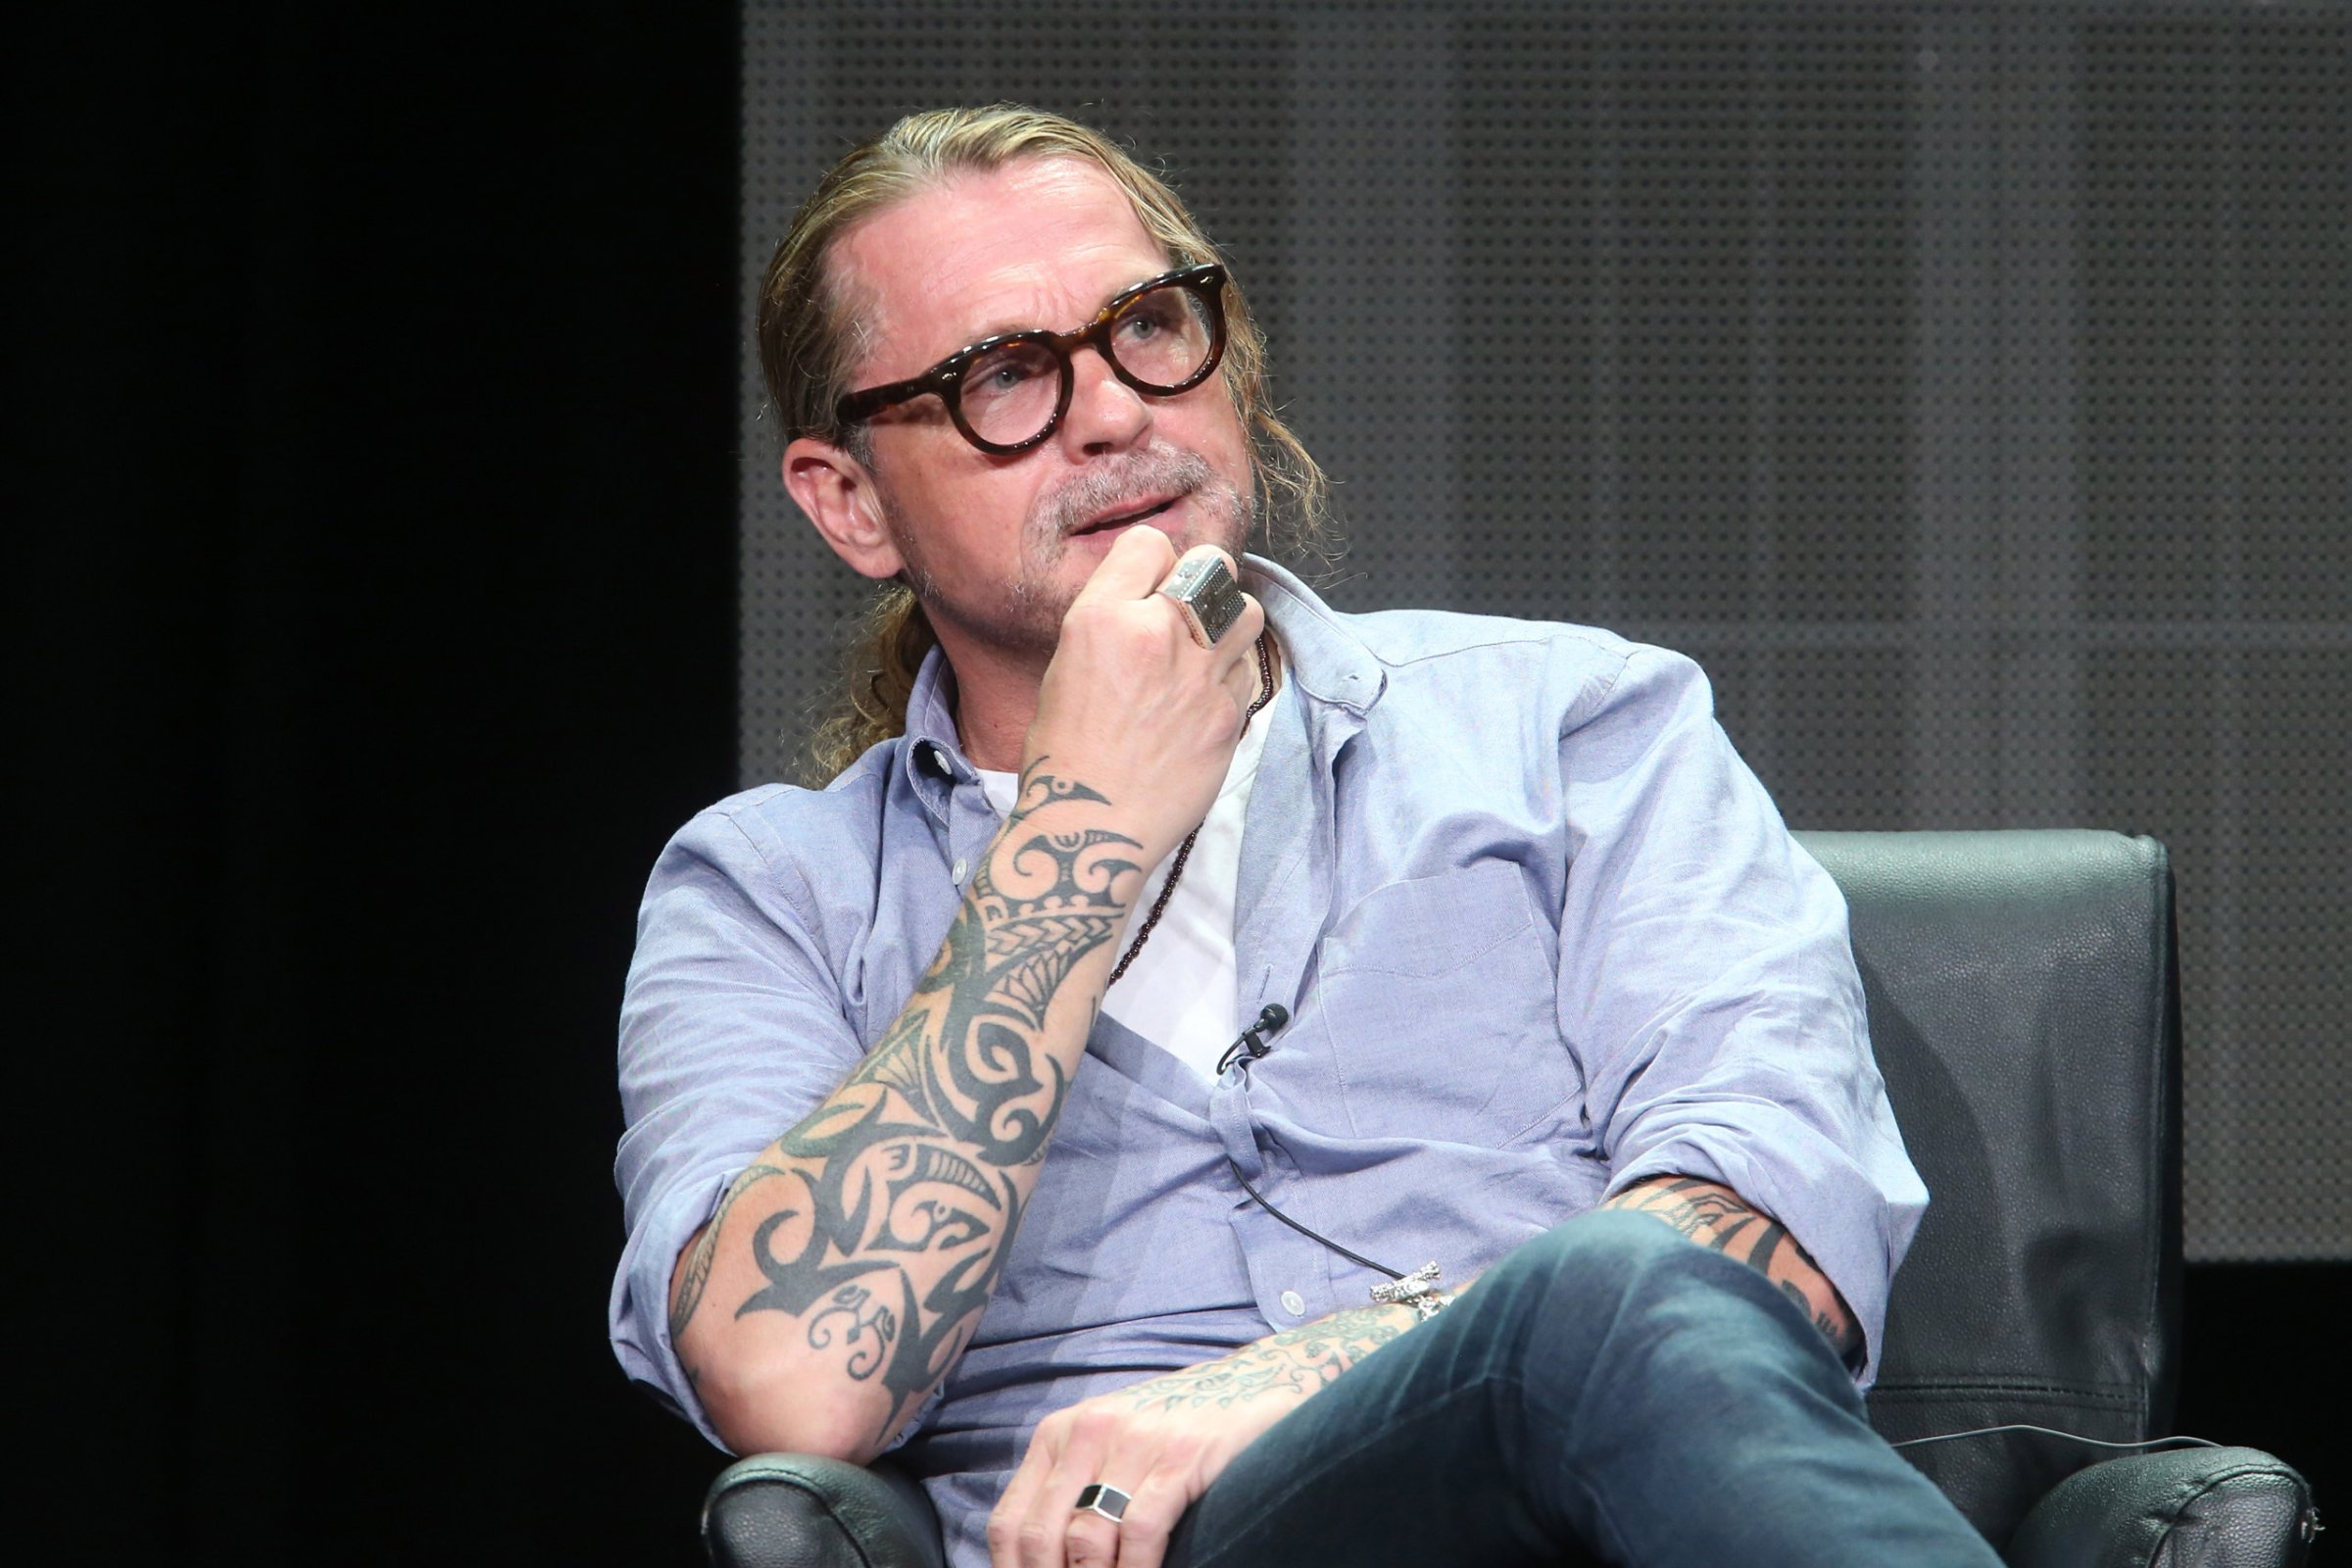 BEVERLY HILLS, CA - AUGUST 07: Writer/creator Kurt Sutter speaks onstage during 'The Bastard Executioner' panel discussion at the FX portion of the 2015 Summer TCA Tour at The Beverly Hilton Hotel on August 7, 2015 in Beverly Hills, California. (Photo by Frederick M. Brown/Getty Images)